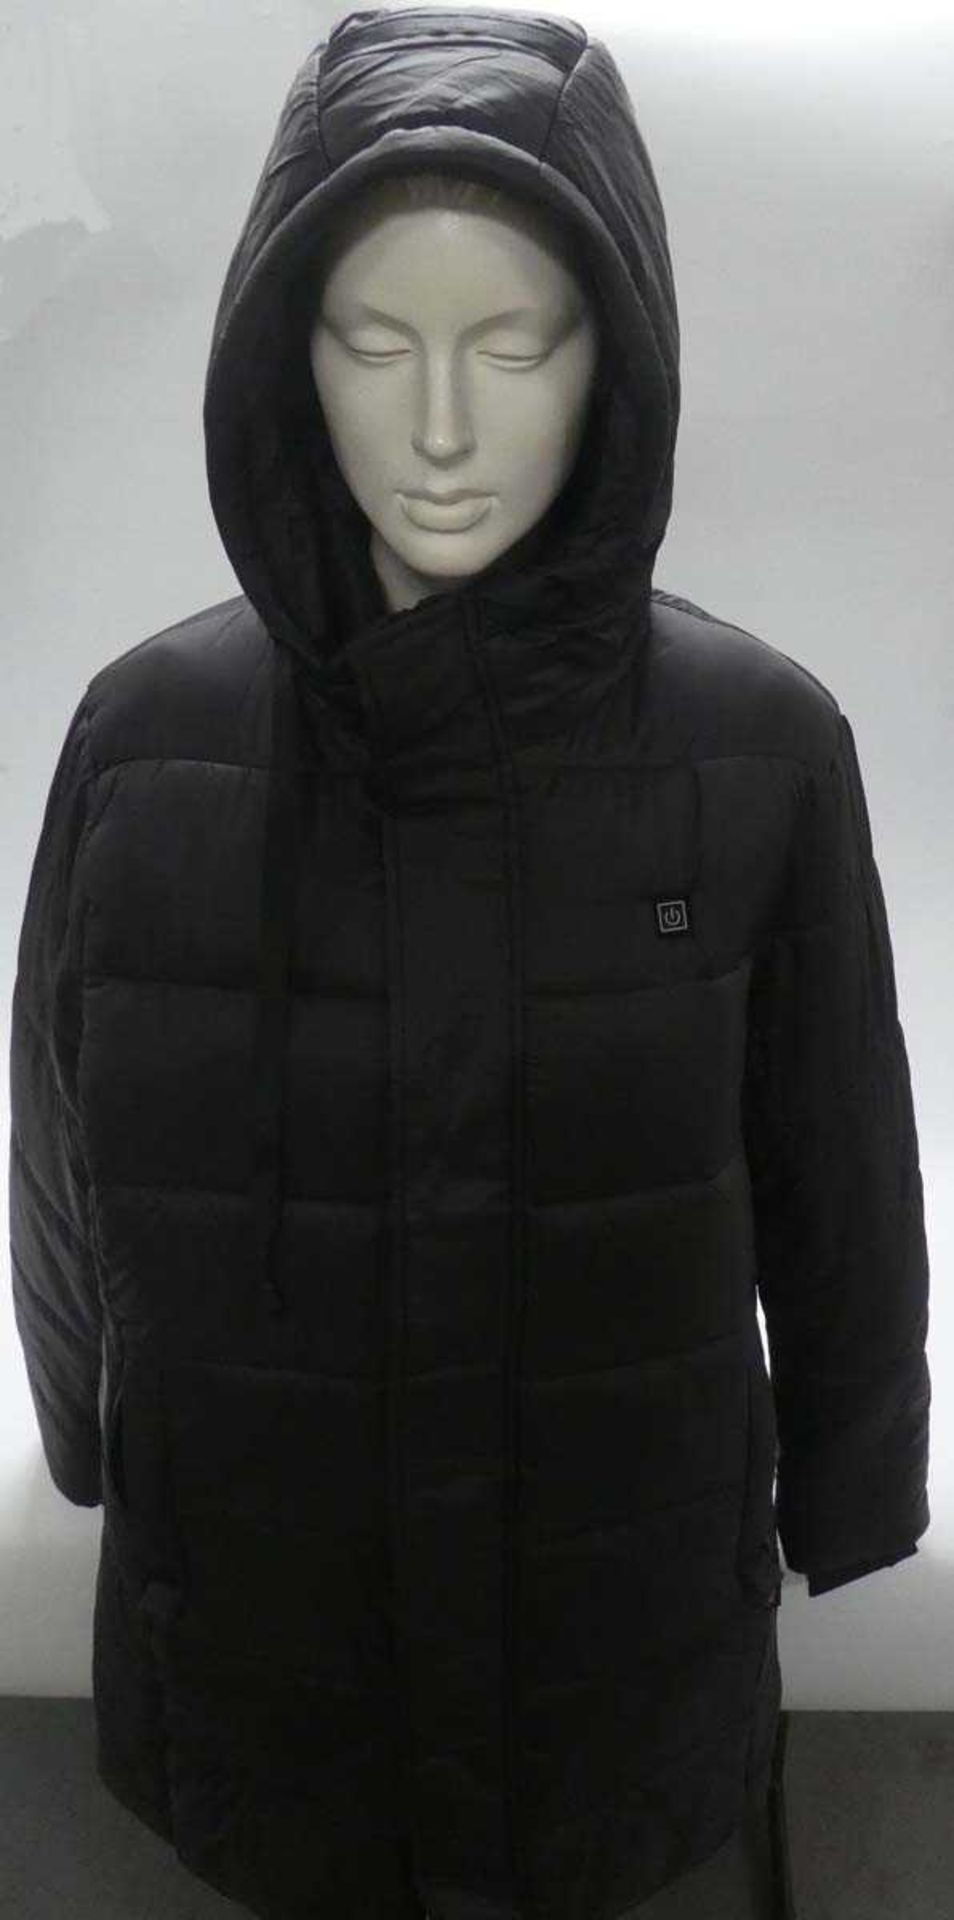 +VAT Thermofusion heated parka with 5000mAh battery pack size large